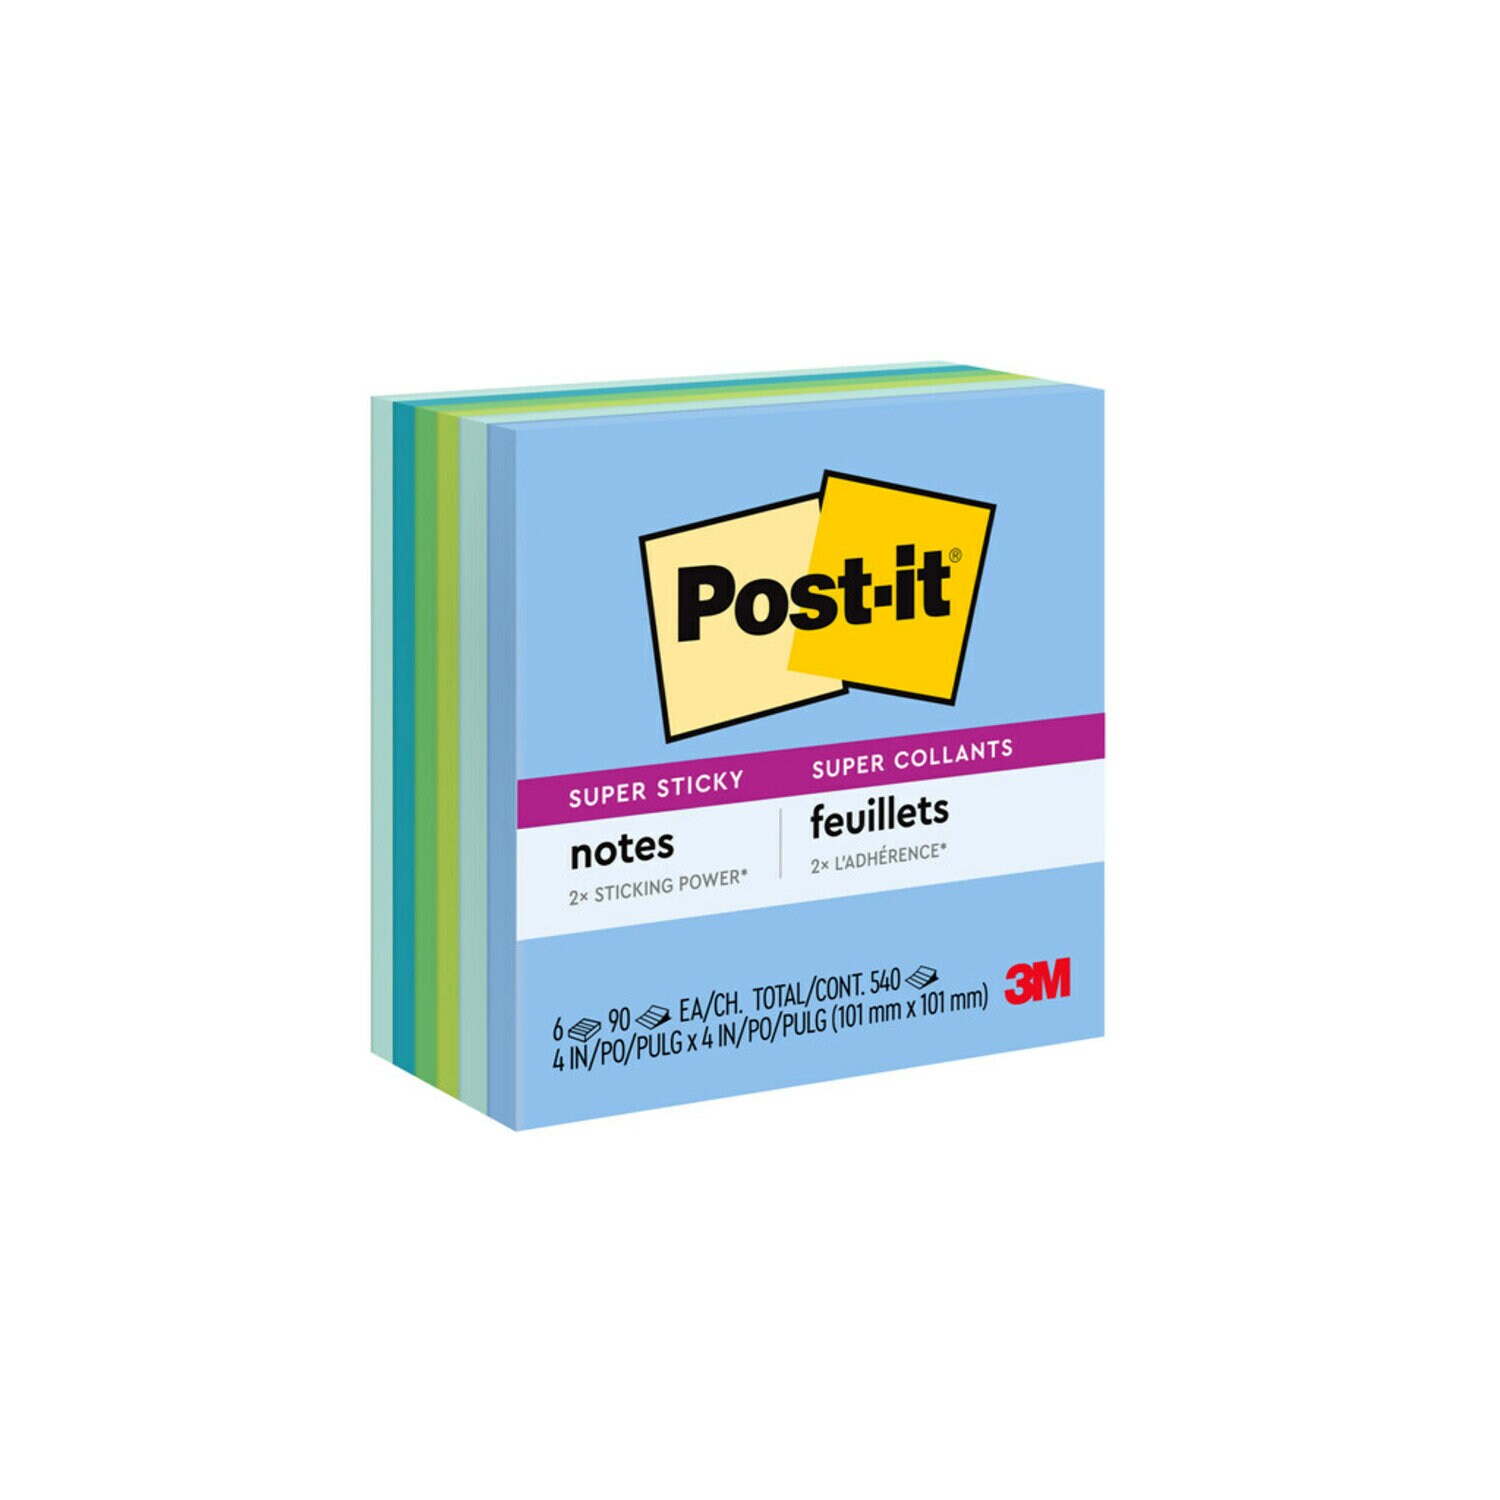 7100066315 - Post-it Super Sticky Recycled Notes 654-6SST, 3 in x 3 in (76 mm x 76
mm) Bora Bora Collection